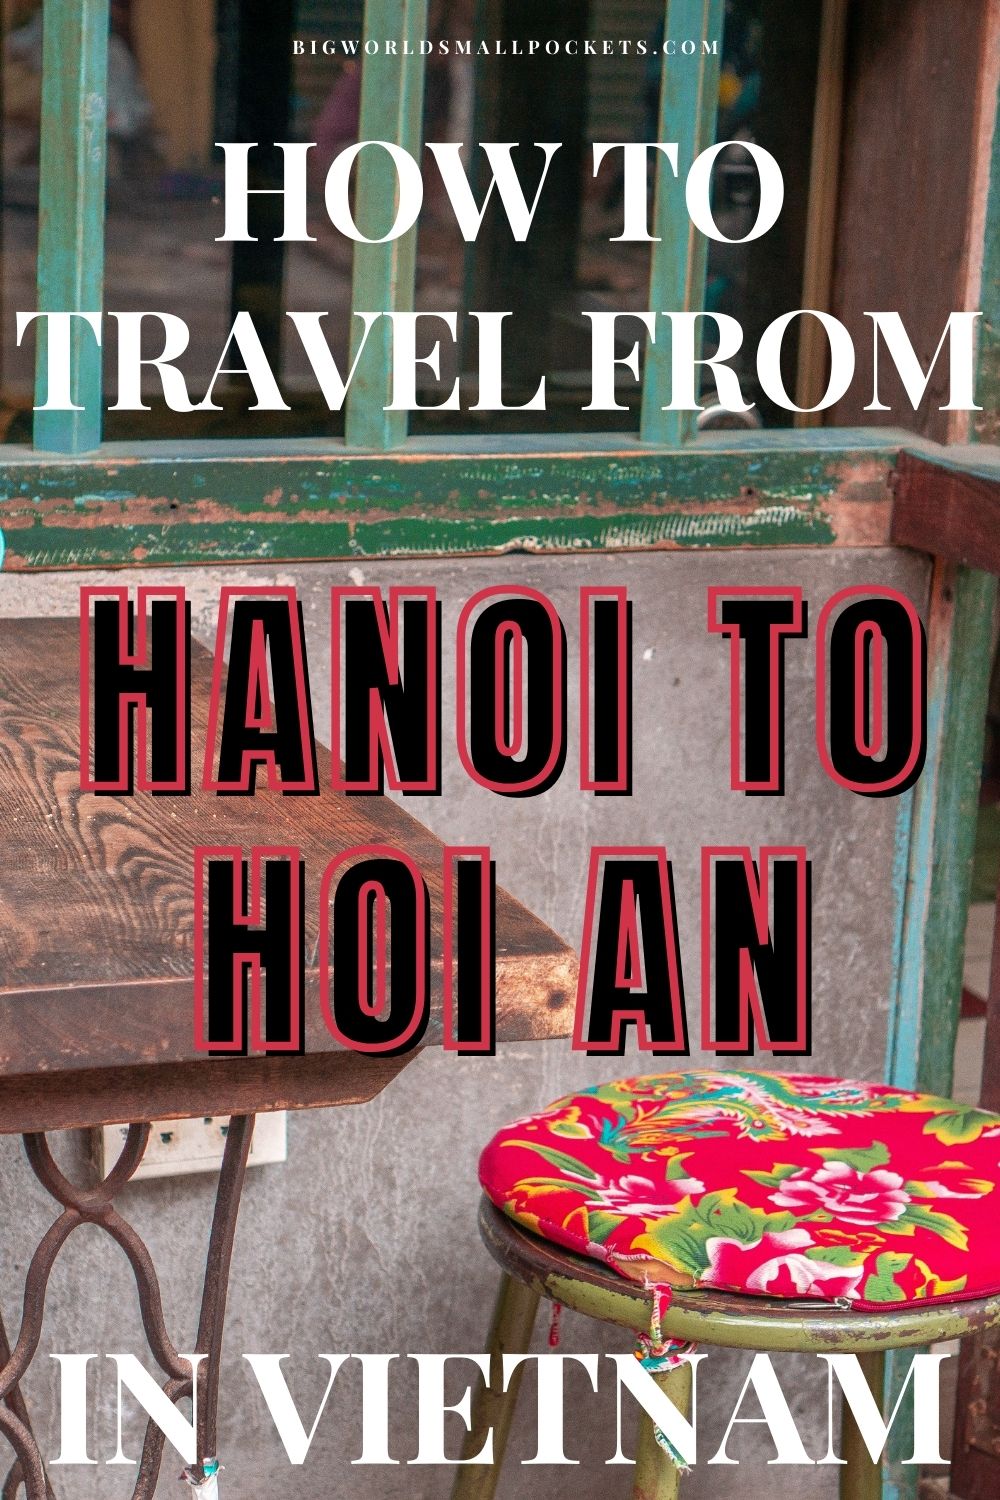 How to Travel Between Hanoi and Hoi An in Vietnam